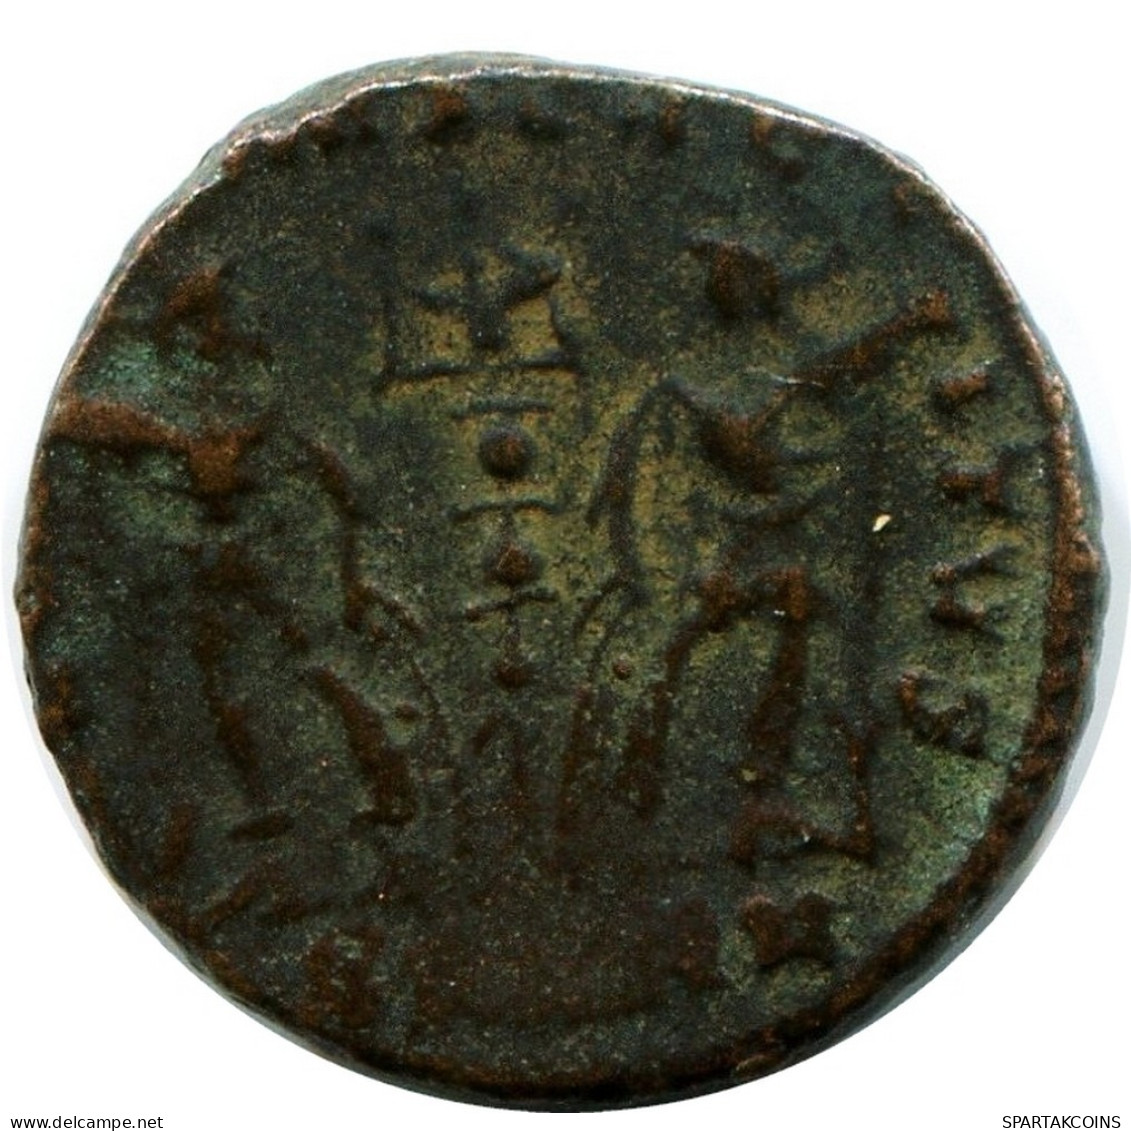 CONSTANS MINTED IN ANTIOCH FOUND IN IHNASYAH HOARD EGYPT #ANC11805.14.F.A - El Imperio Christiano (307 / 363)